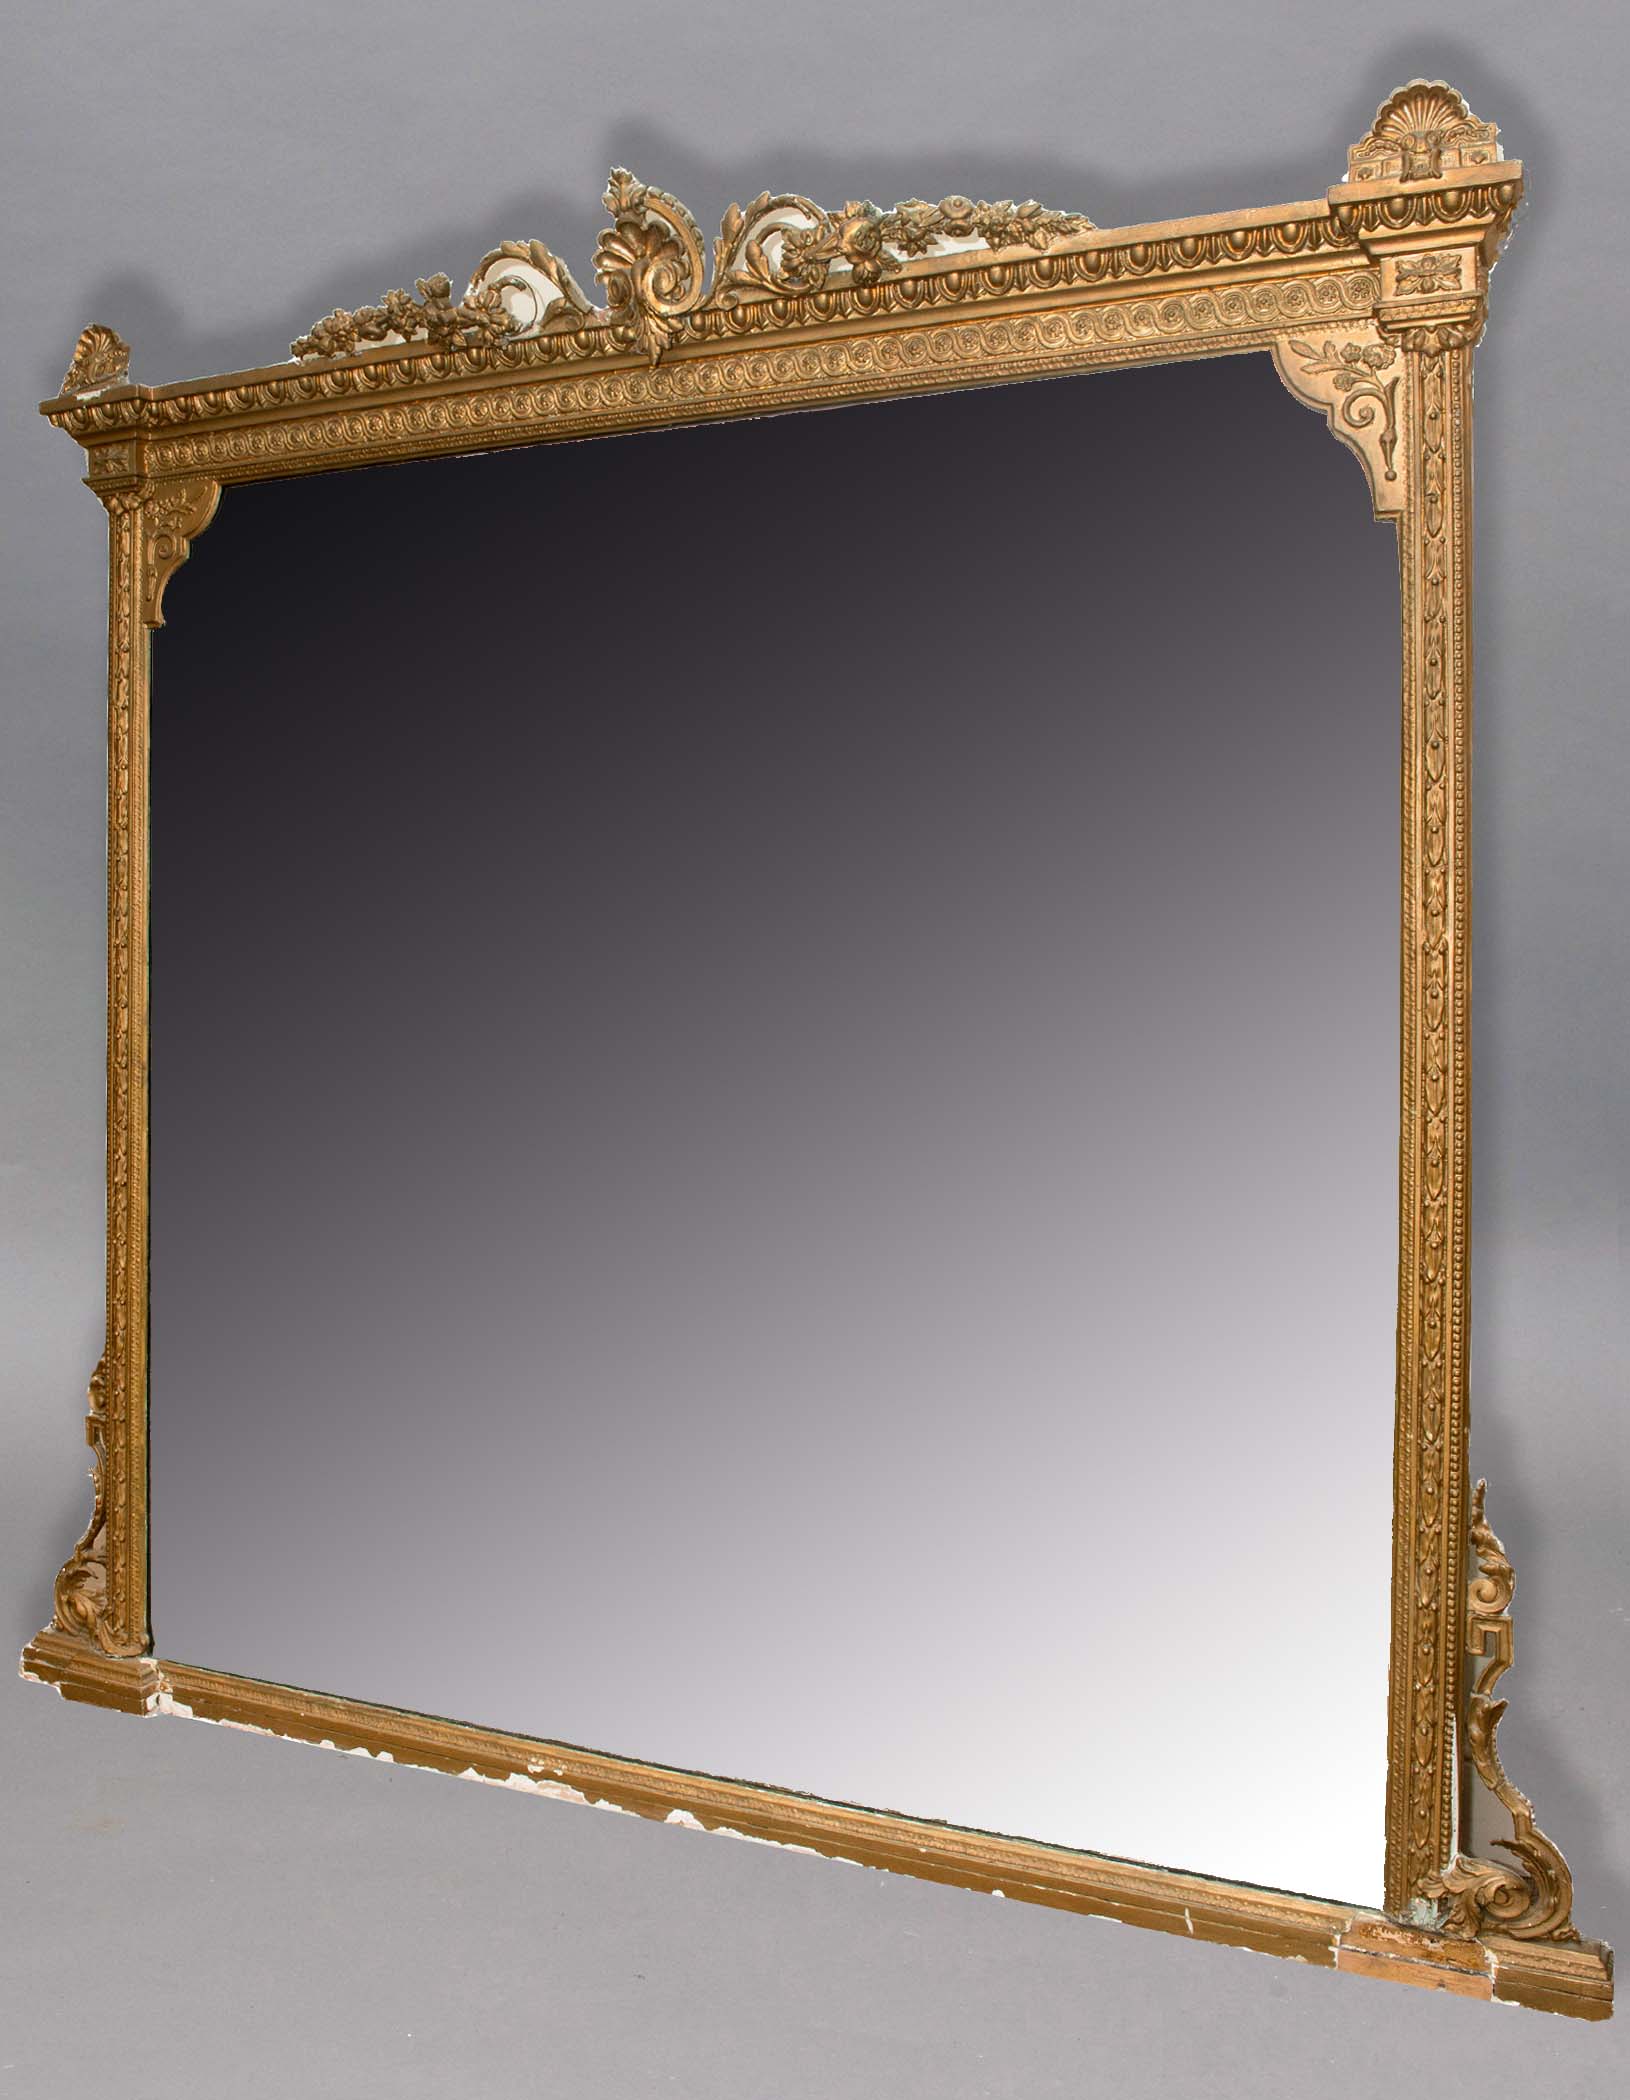 NEO-CLASSICAL GILT GESSO OVER MANTEL MIRROR, 19th century, the rectangular plate flanked by harebell